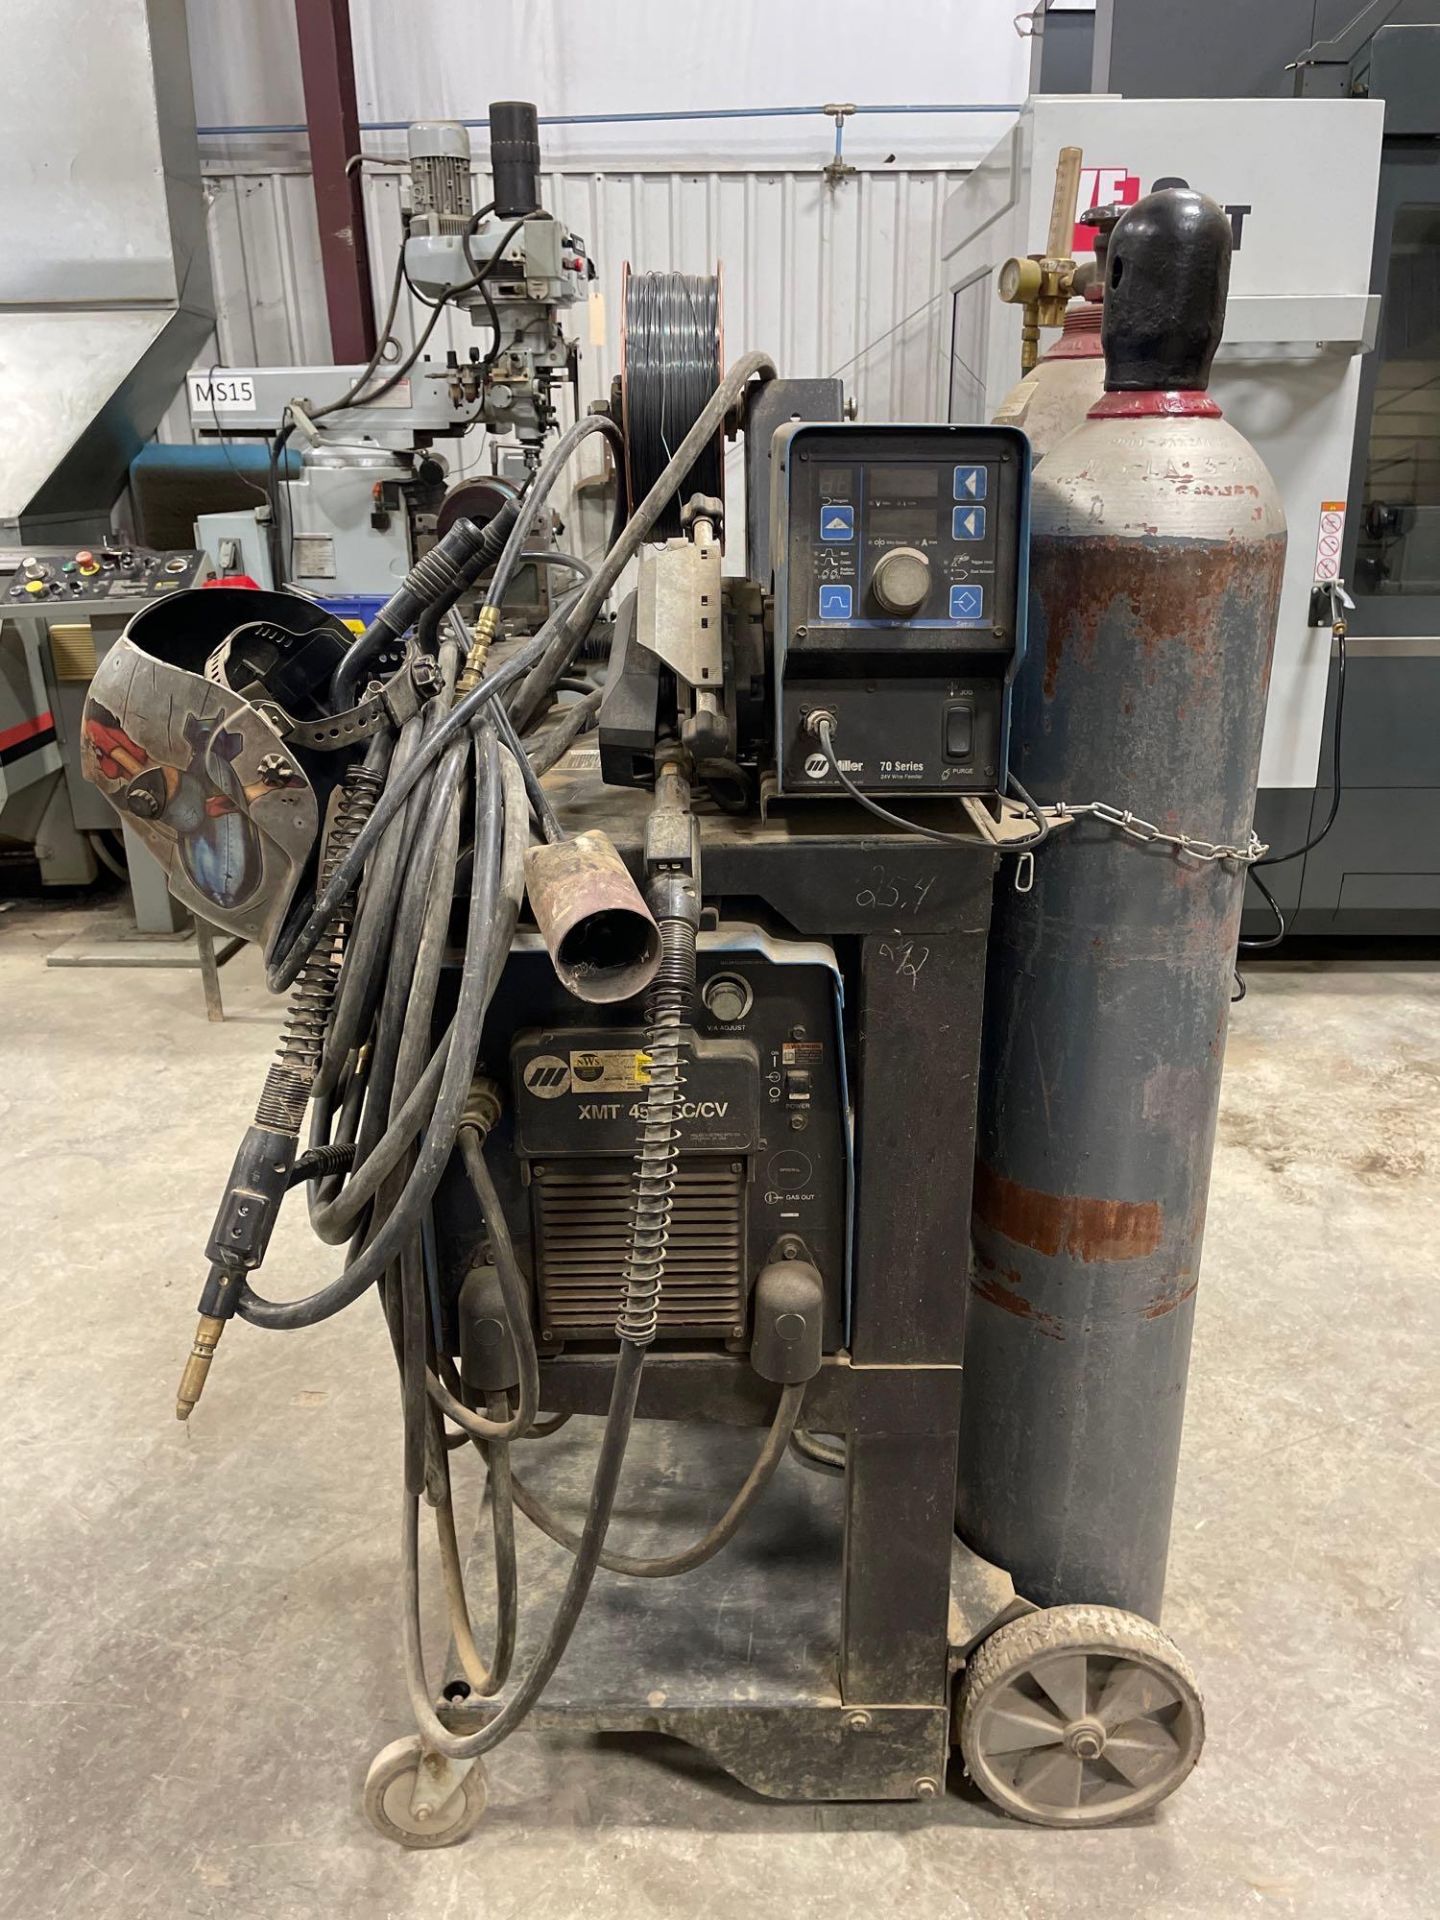 Miller XMT 450 CC/CV Welding Power Source on Casters with Miller 70 Wire Feeder